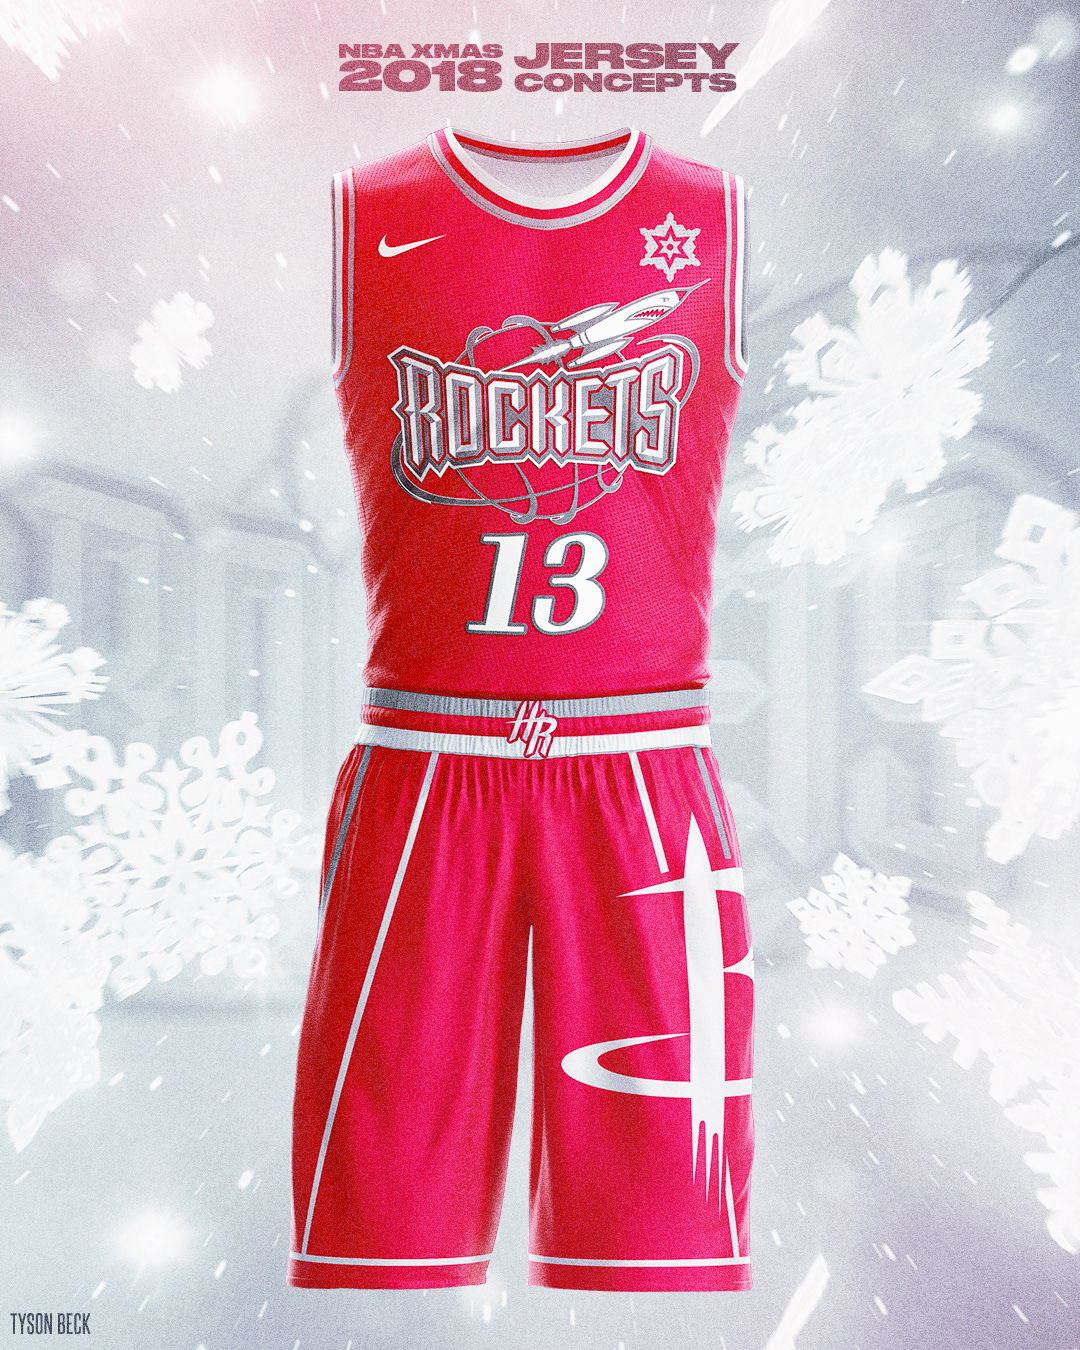 NBA x NIKE 2018 Christmas Day - Jersey Concepts on Behance